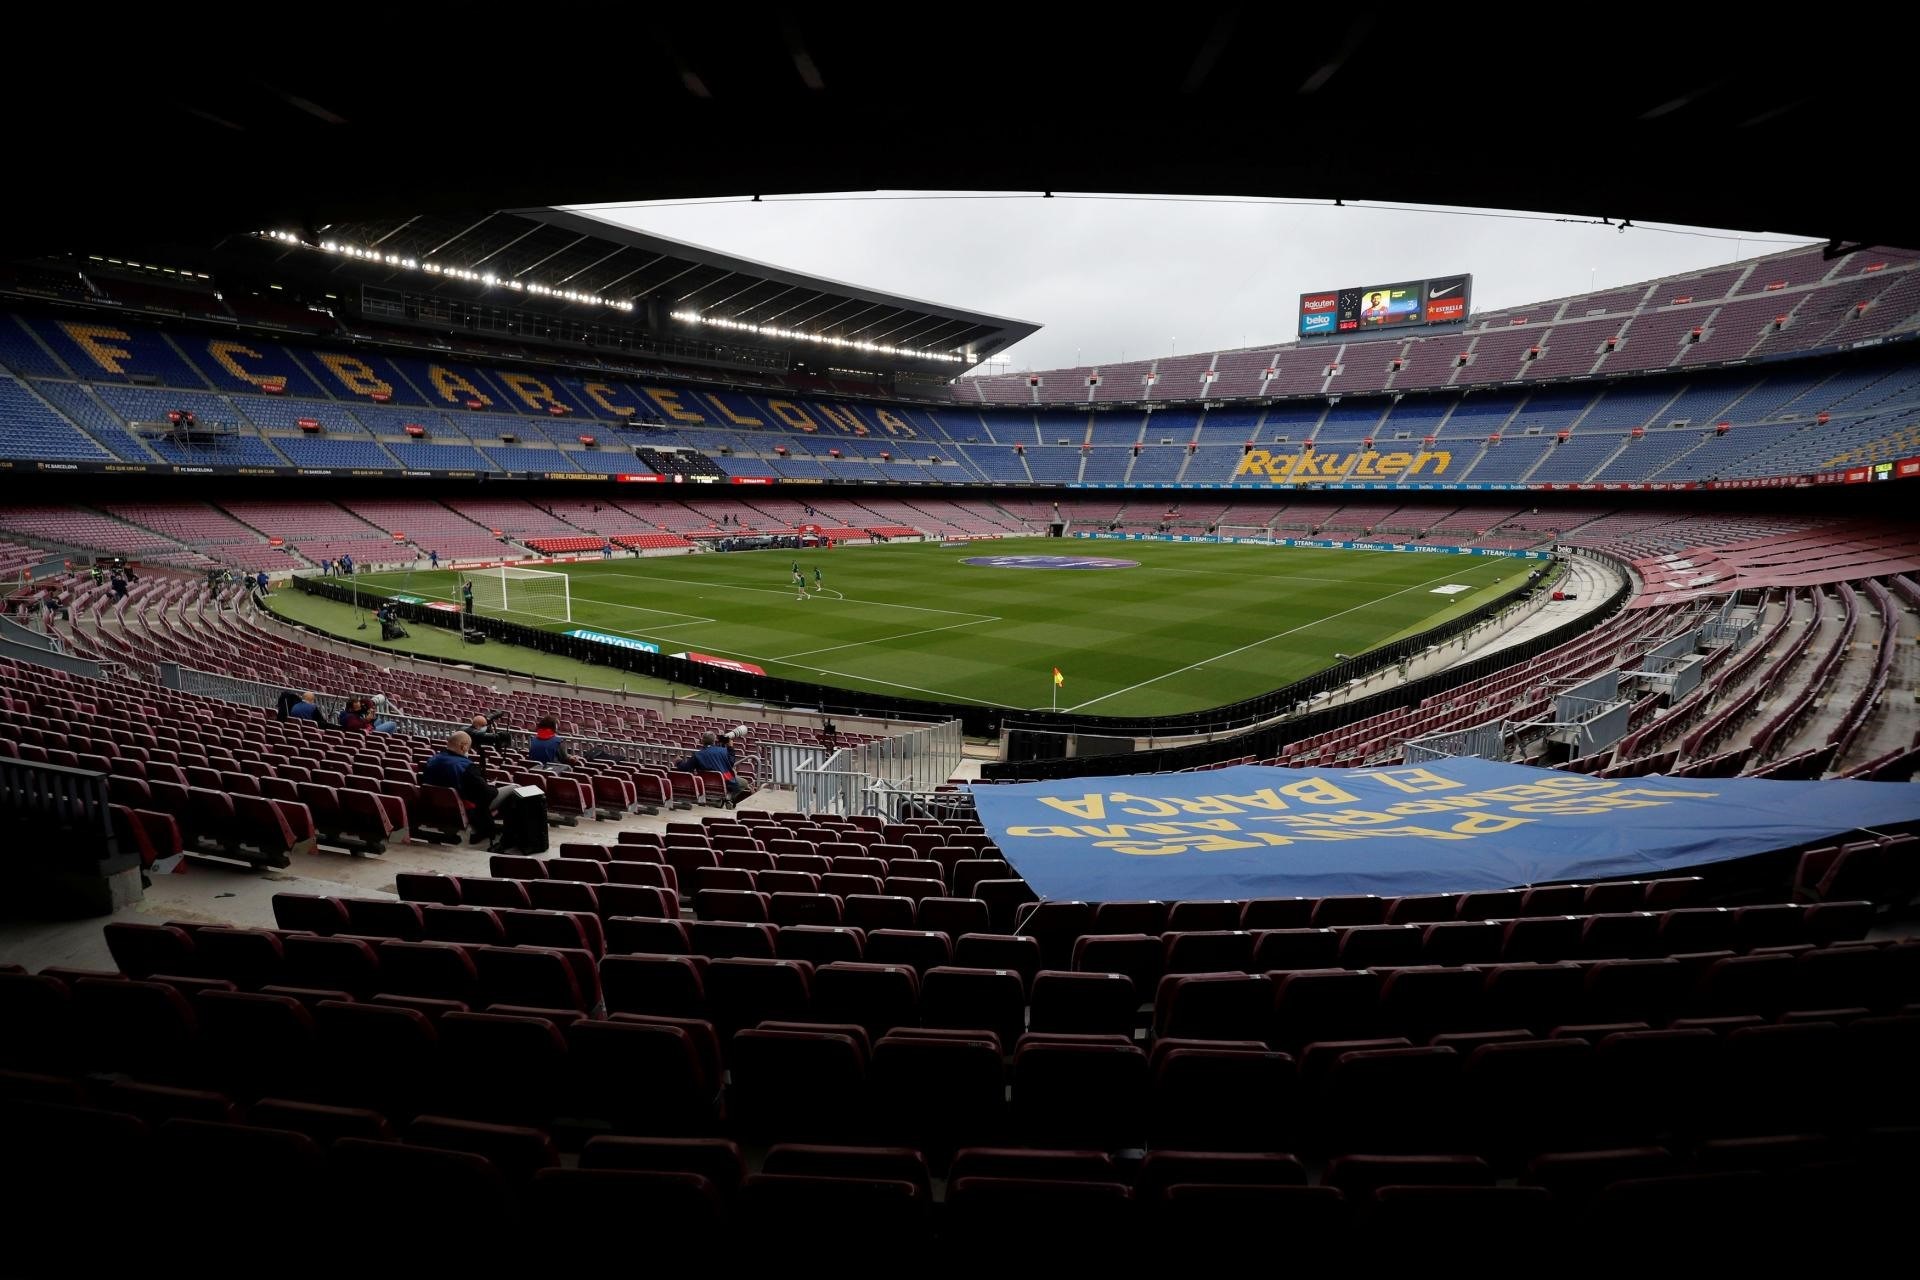 Spain’s La Liga attracts $3.2 bln investment from CVC